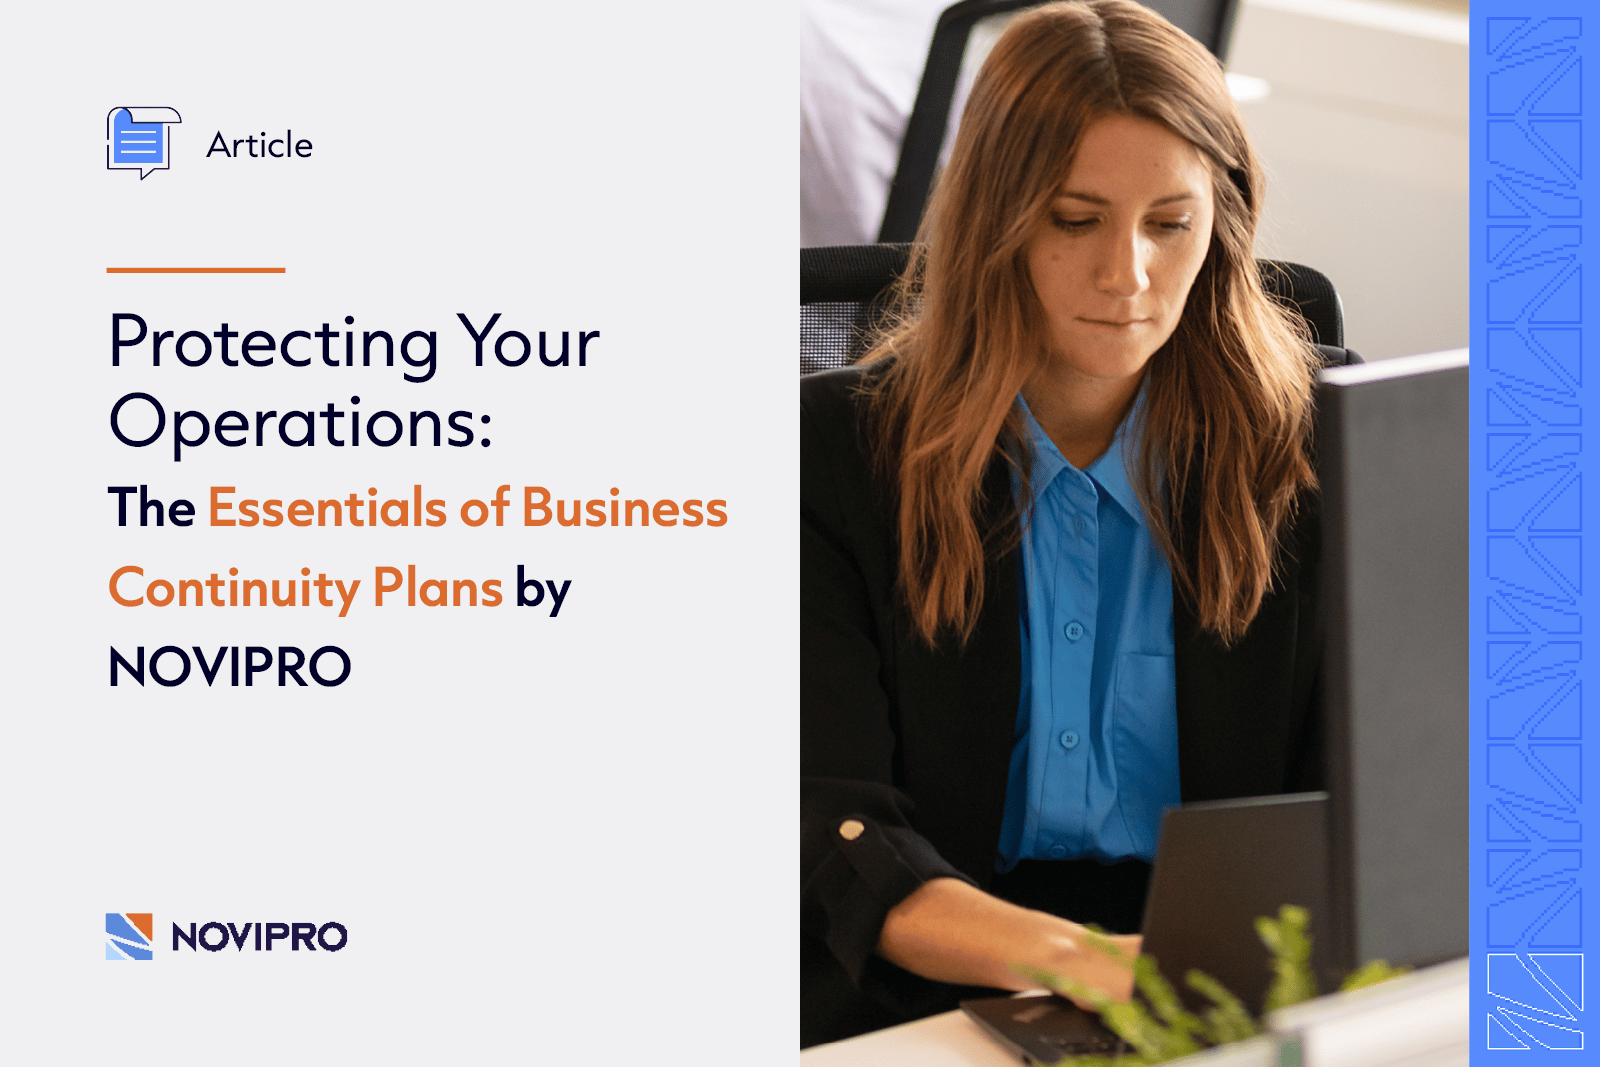 Protecting Your Operations: The Essentials of Business Continuity Plans by NOVIPRO